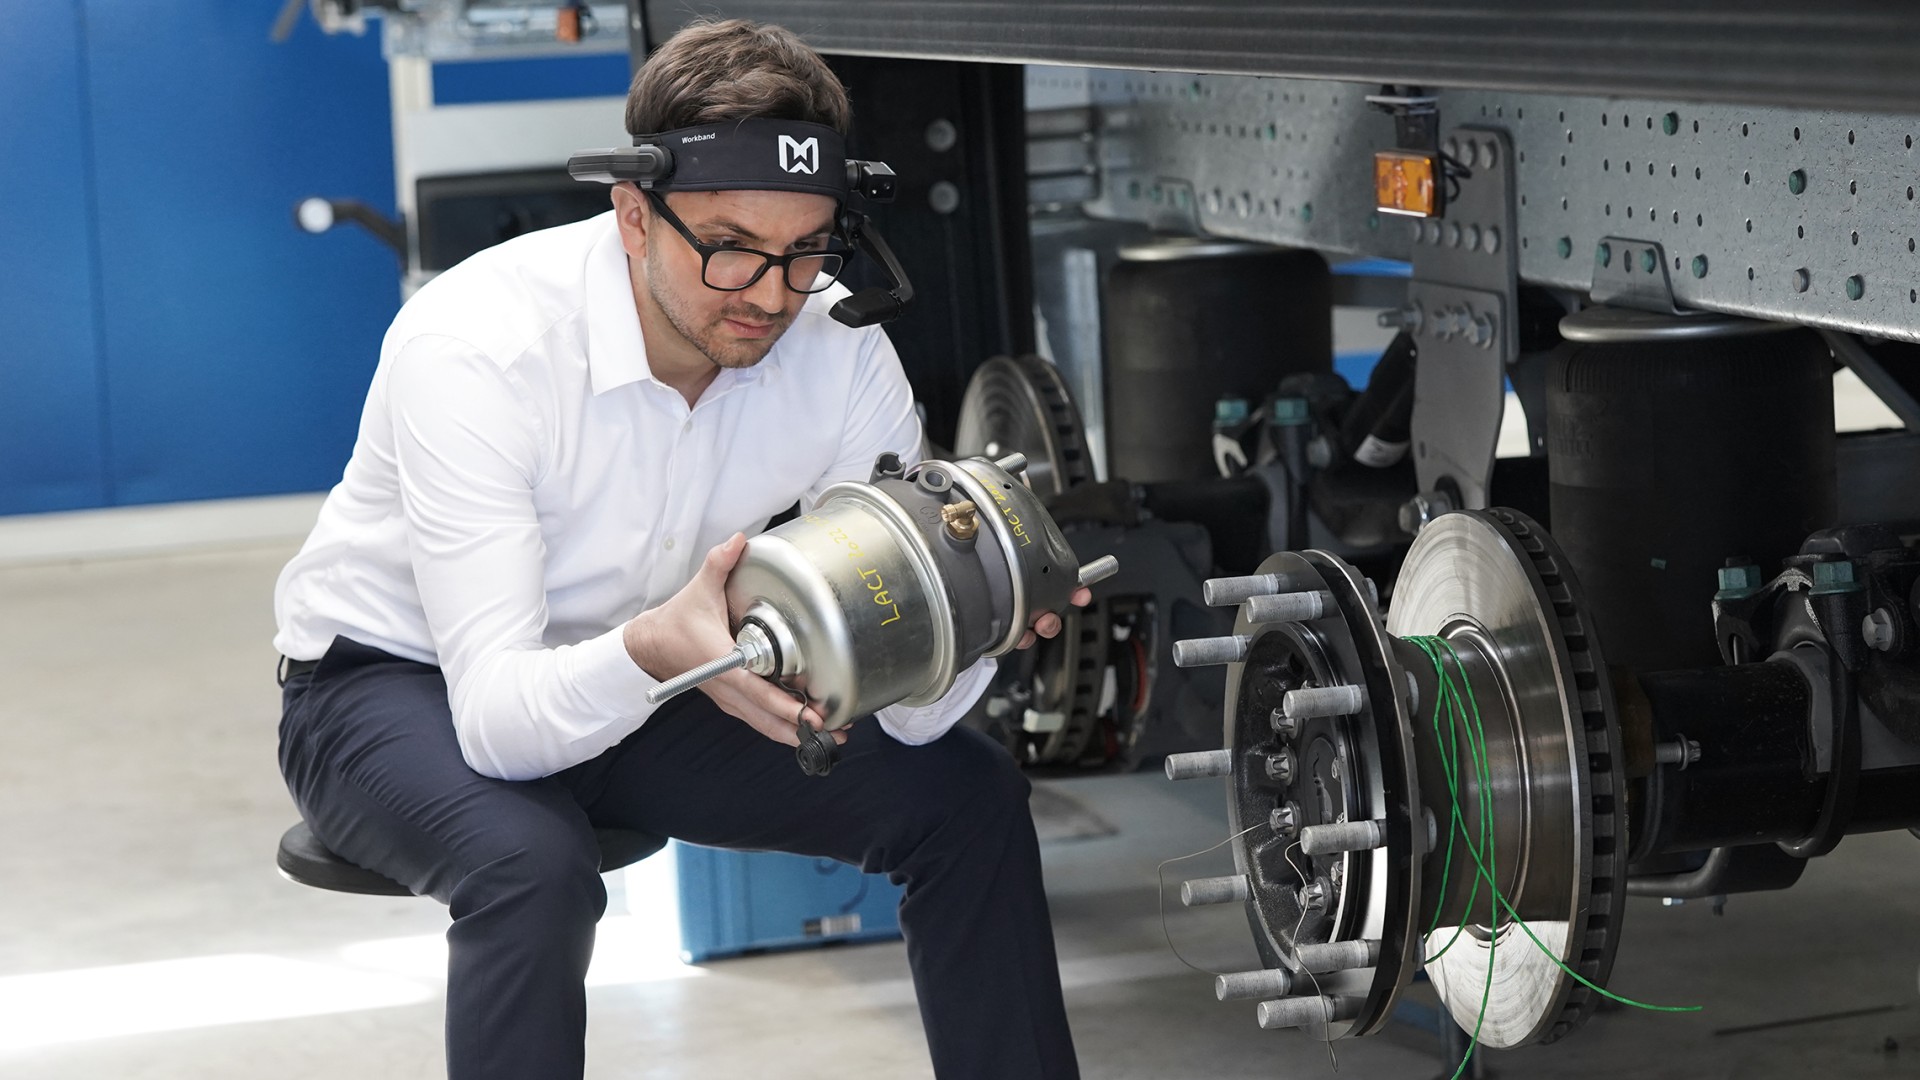 In front of a truck in the workshop, a Knorr-Bremse employee uses AR glasses to look at a compressor.